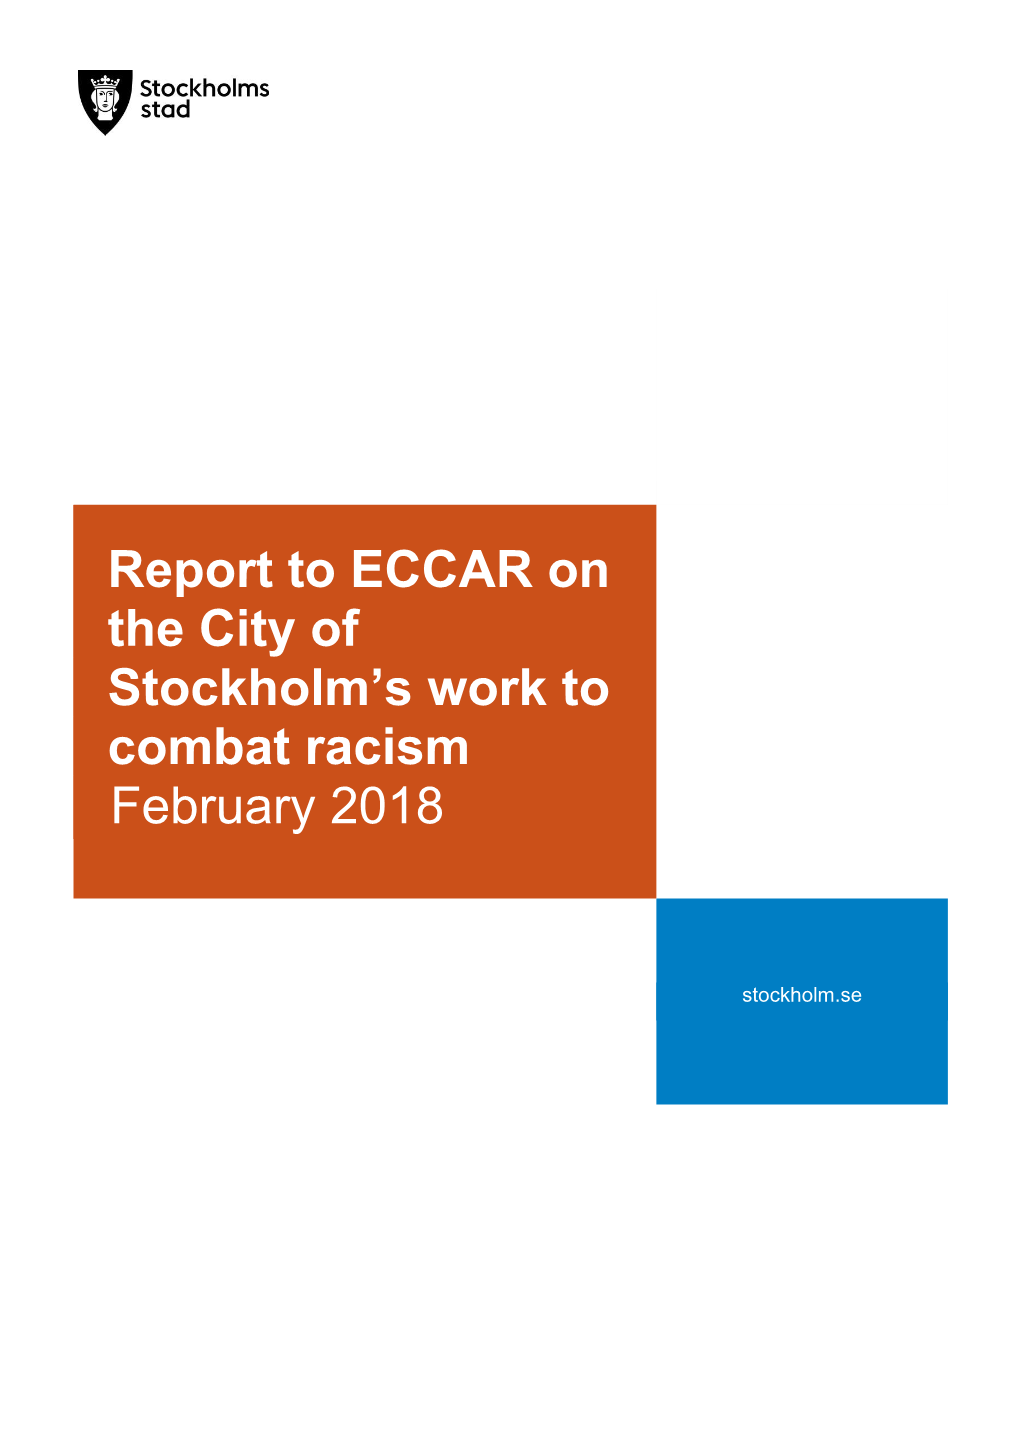 Report to ECCAR on the City of Stockholm's Work to Combat Racism